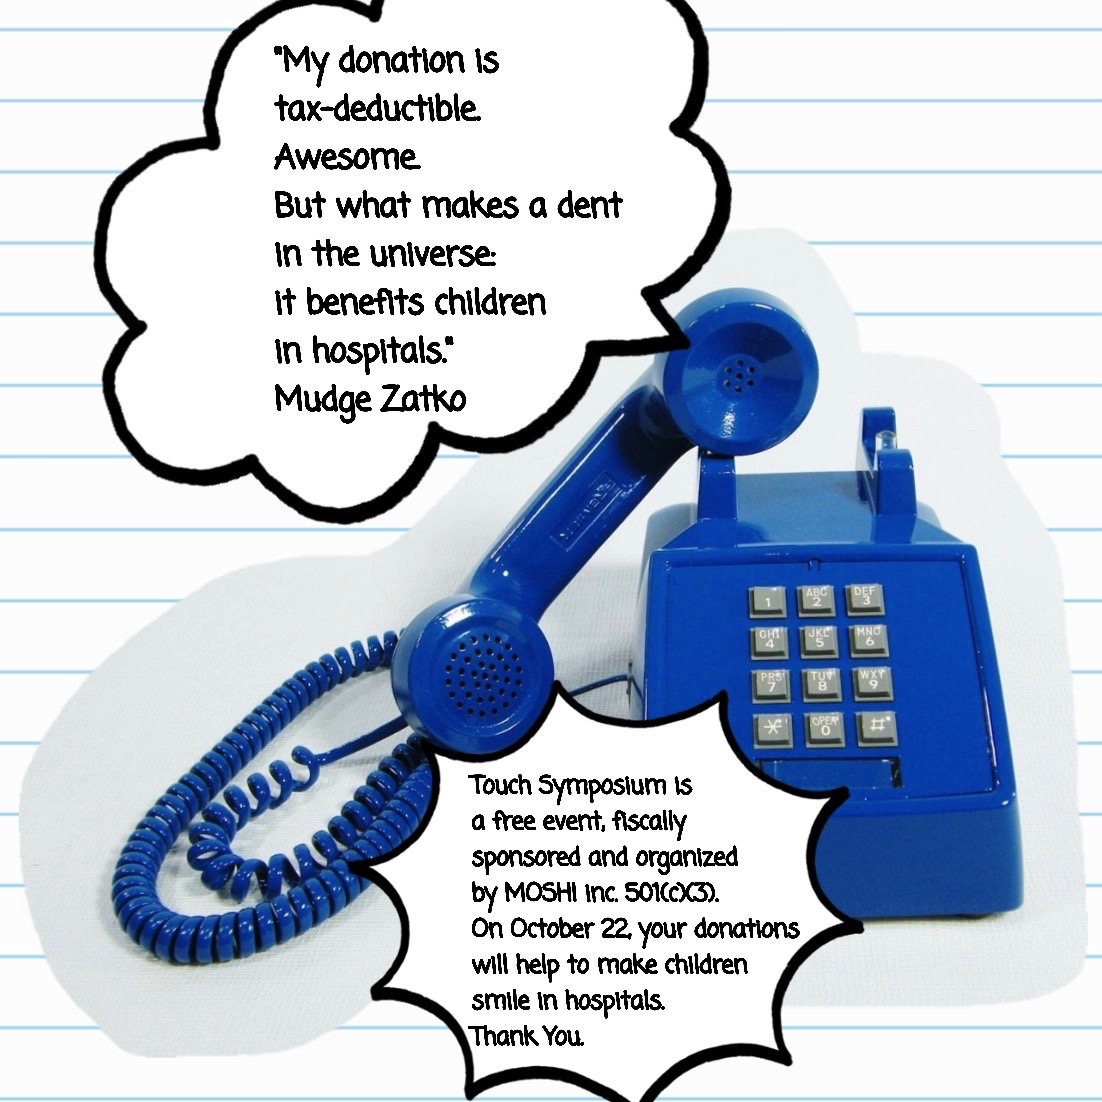 A blue, 1980s-era touchtone telephone with the receiver off the hook. The upper text reads: 'My donation is tax-deductible. Awesome. But what makes a dent in the universe it benefits children in hospitals. --Mudge Zatko' Below the telephone, the text reads: 'Touch Symposium is a free event, fiscally sponsored and organized by MOSHI inc. 501(c)(3). On October 22, your donations will help to make children smile in hospitals. Thank You.'